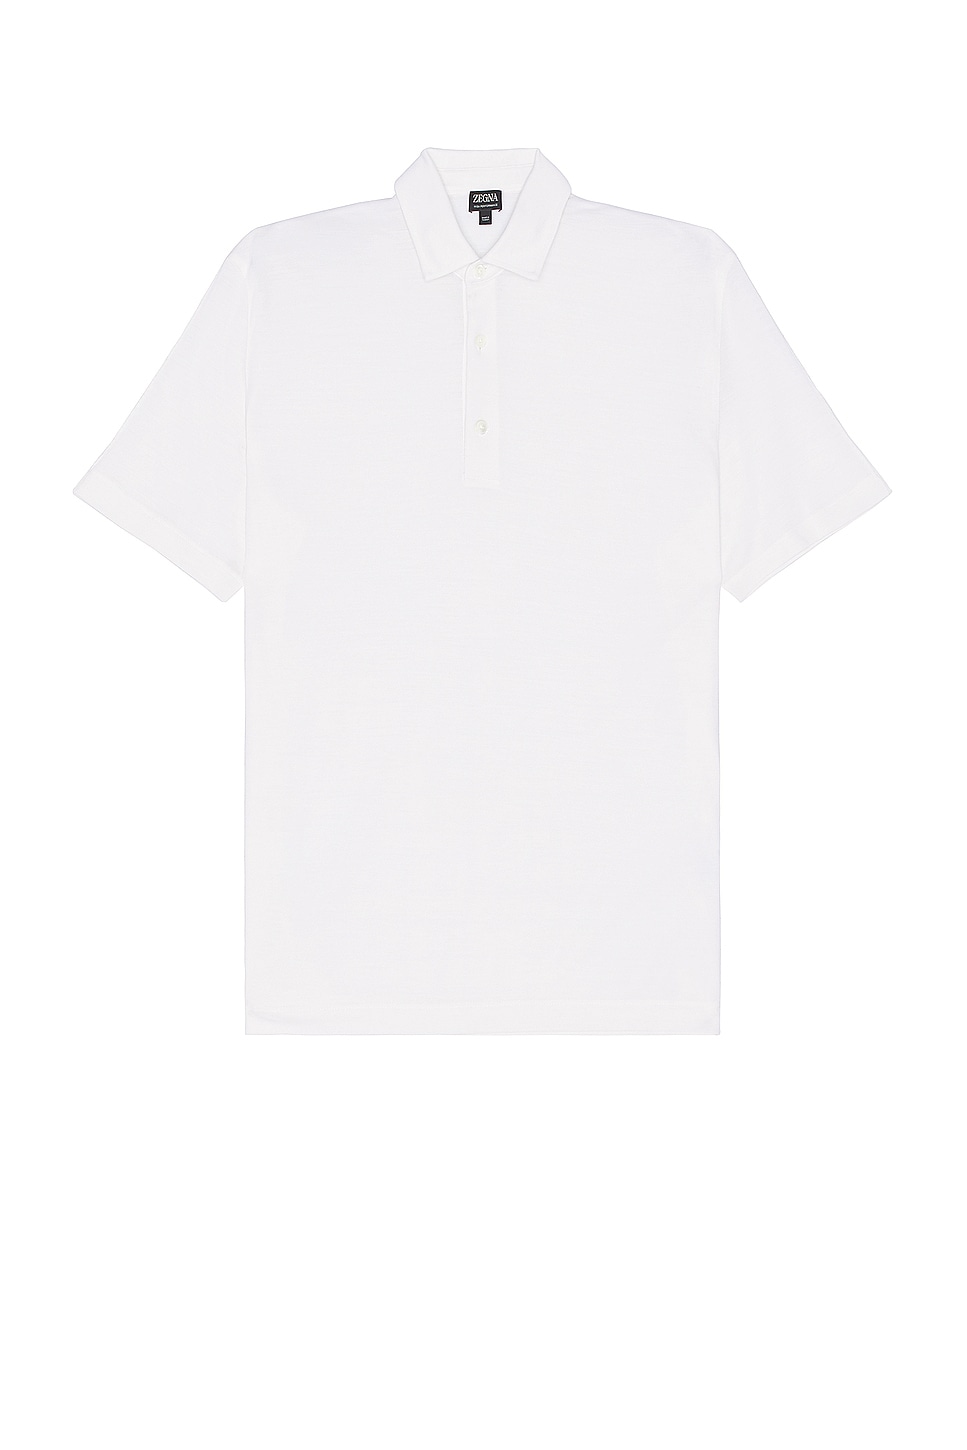 Image 1 of Zegna High Performance Piquet Short Sleeve Polo in White